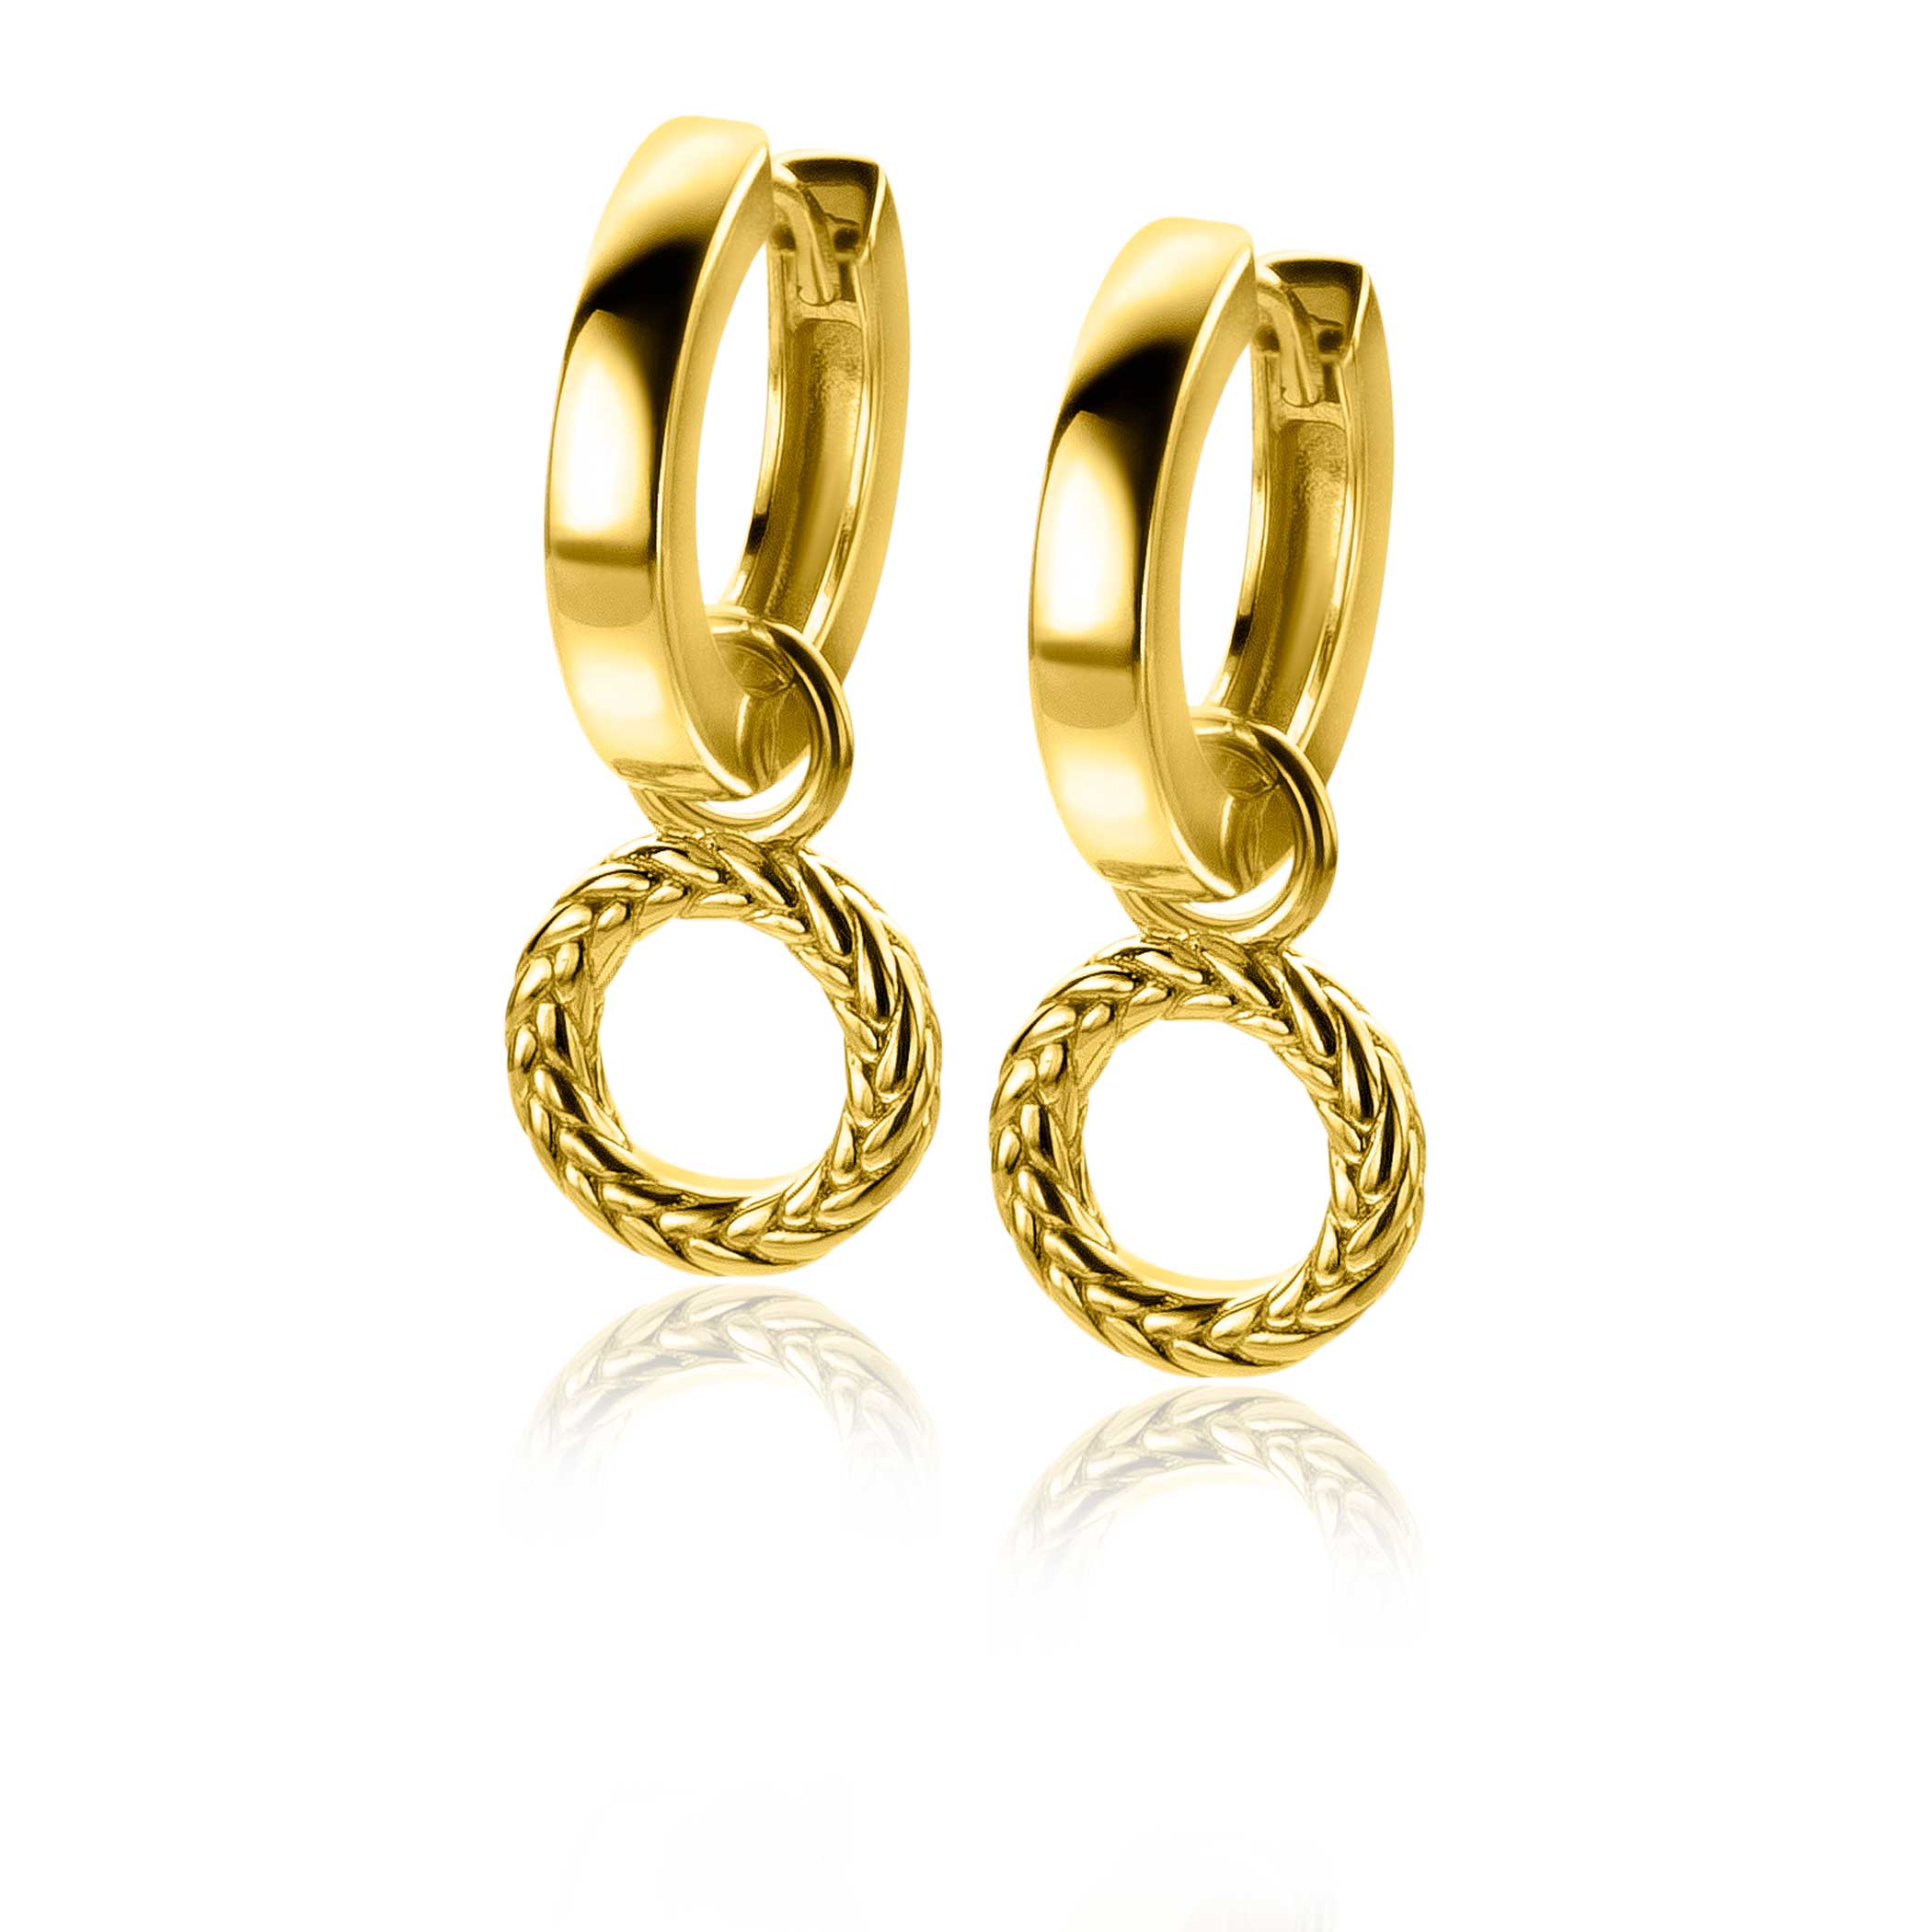 10mm ZINZI Gold Plated Sterling Silver Earrings Pendants Round with Twist Design ZICH2246G (excl. hoop earrings)